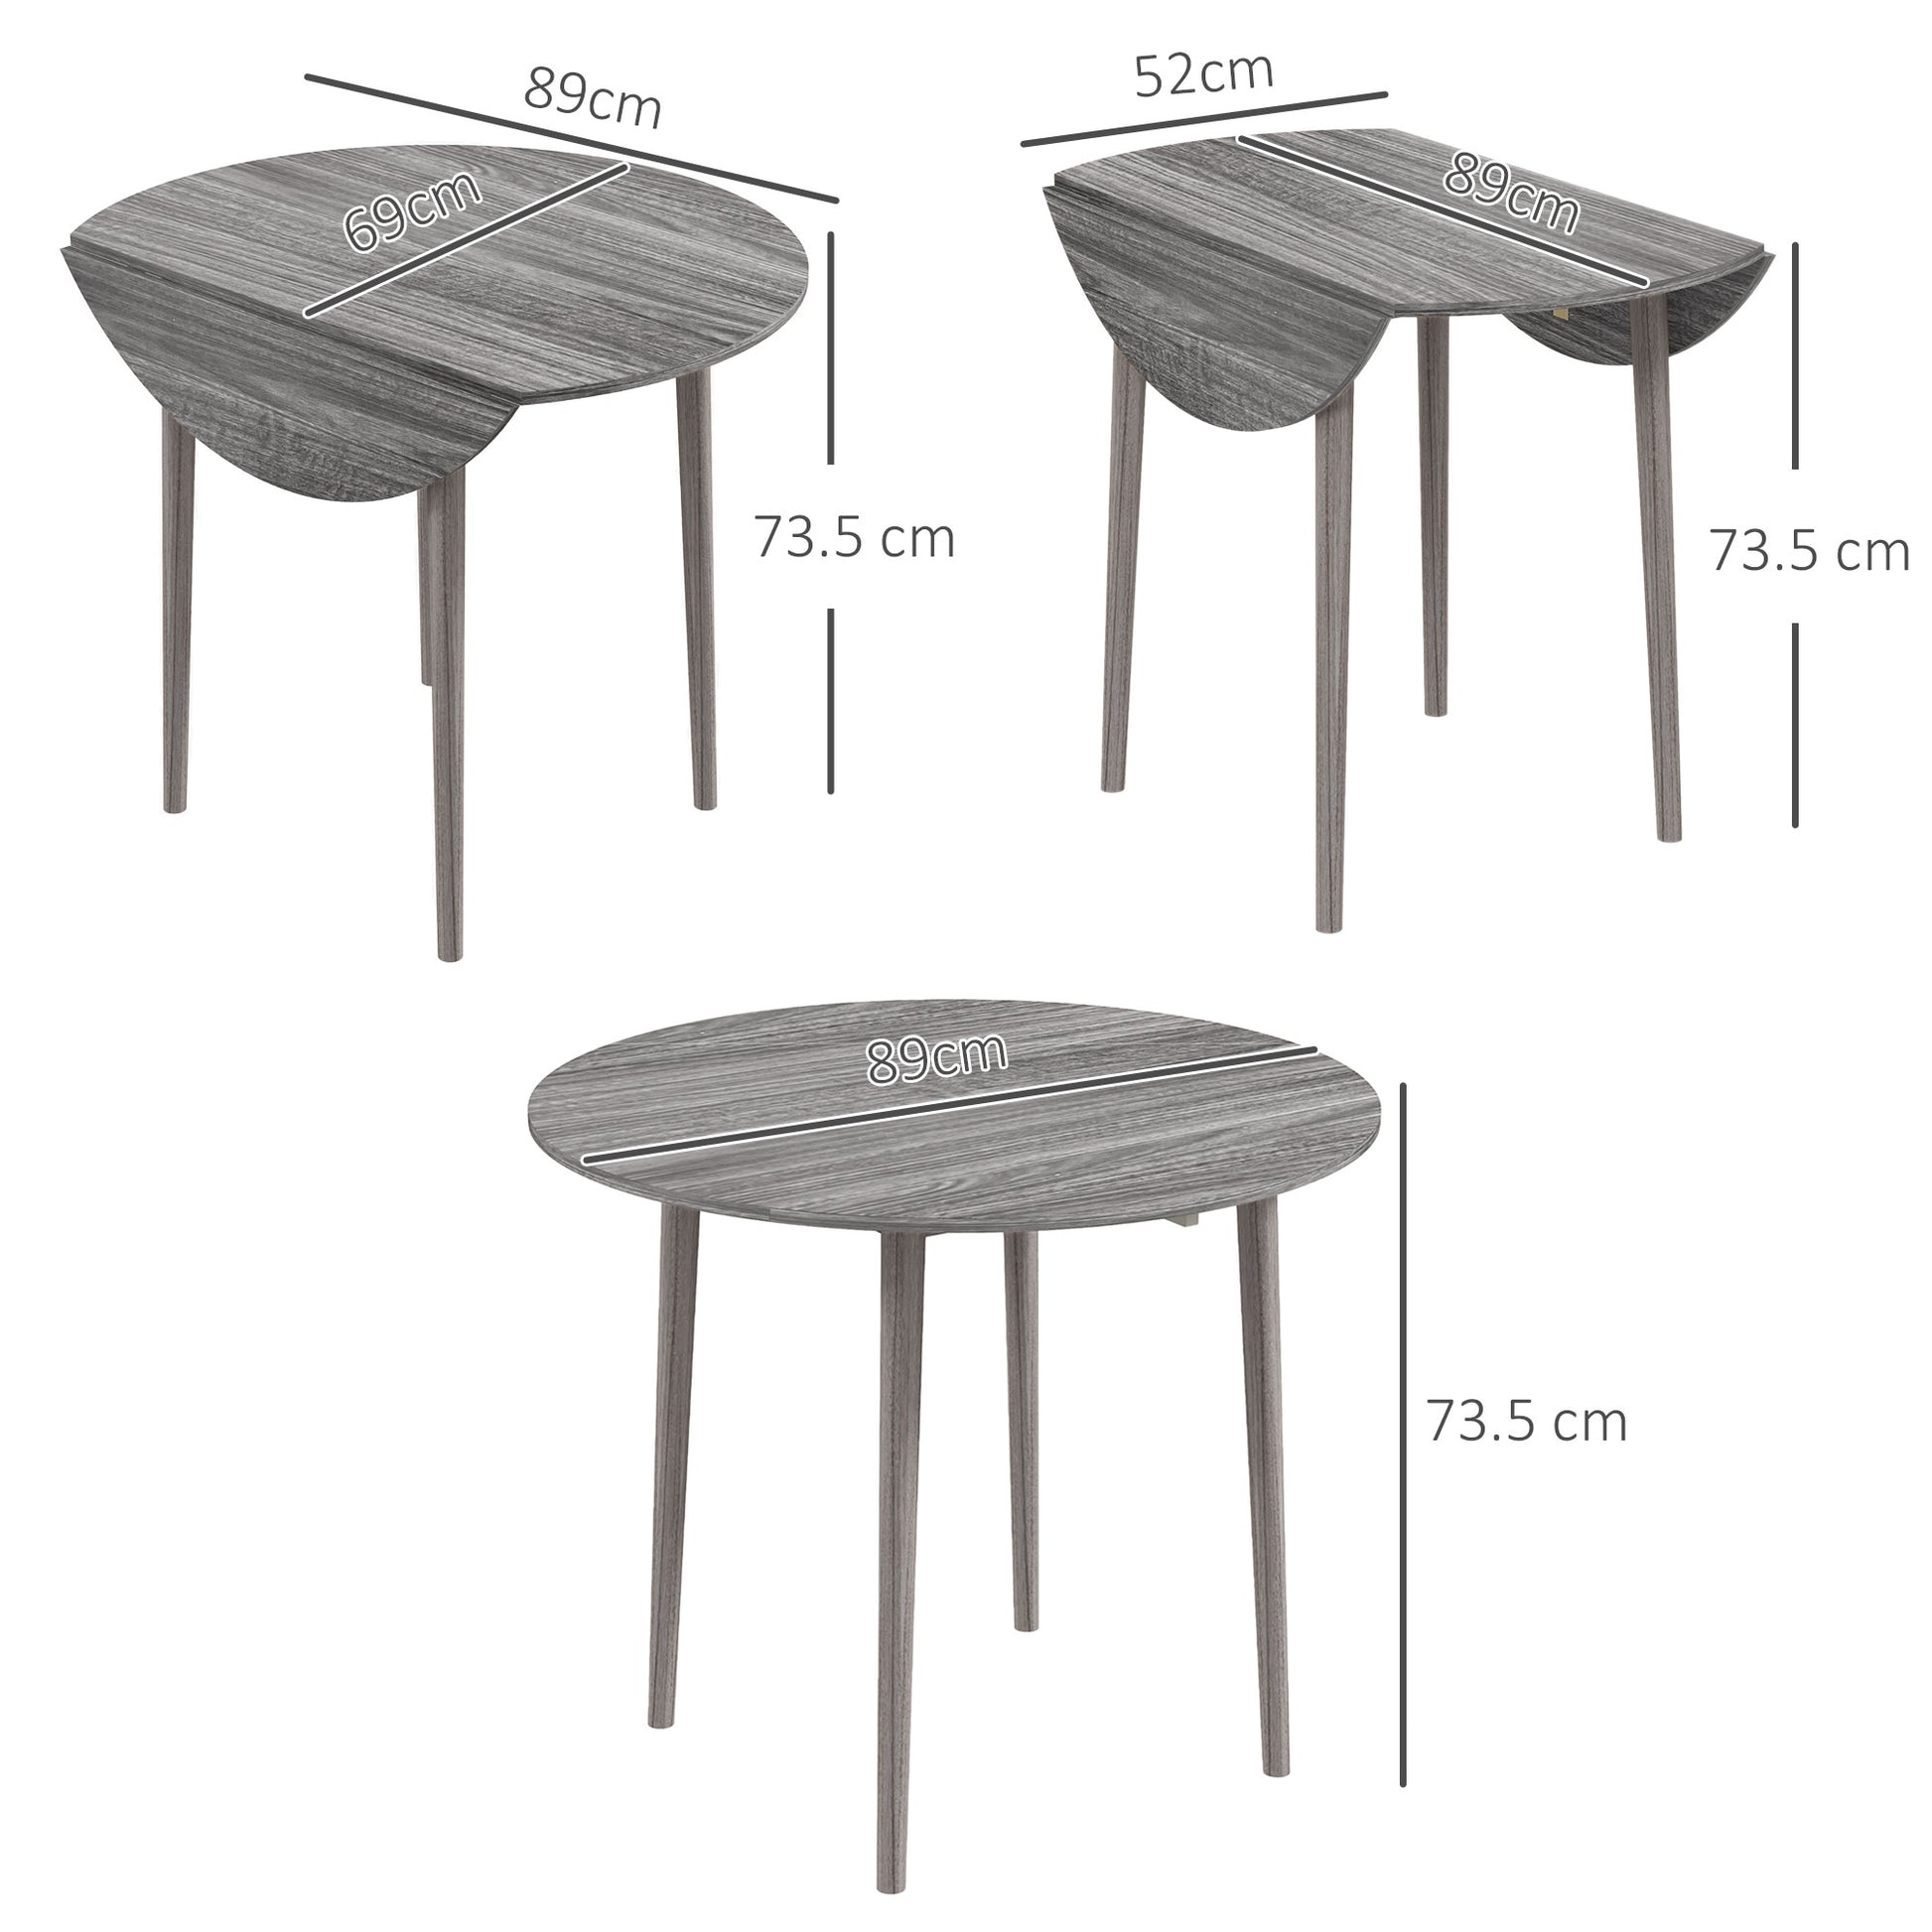 Folding Dining Table for 4, Round Drop Leaf Table, Extendable Dining Table, Small Kitchen Table, Grey, HOMCOM, 3